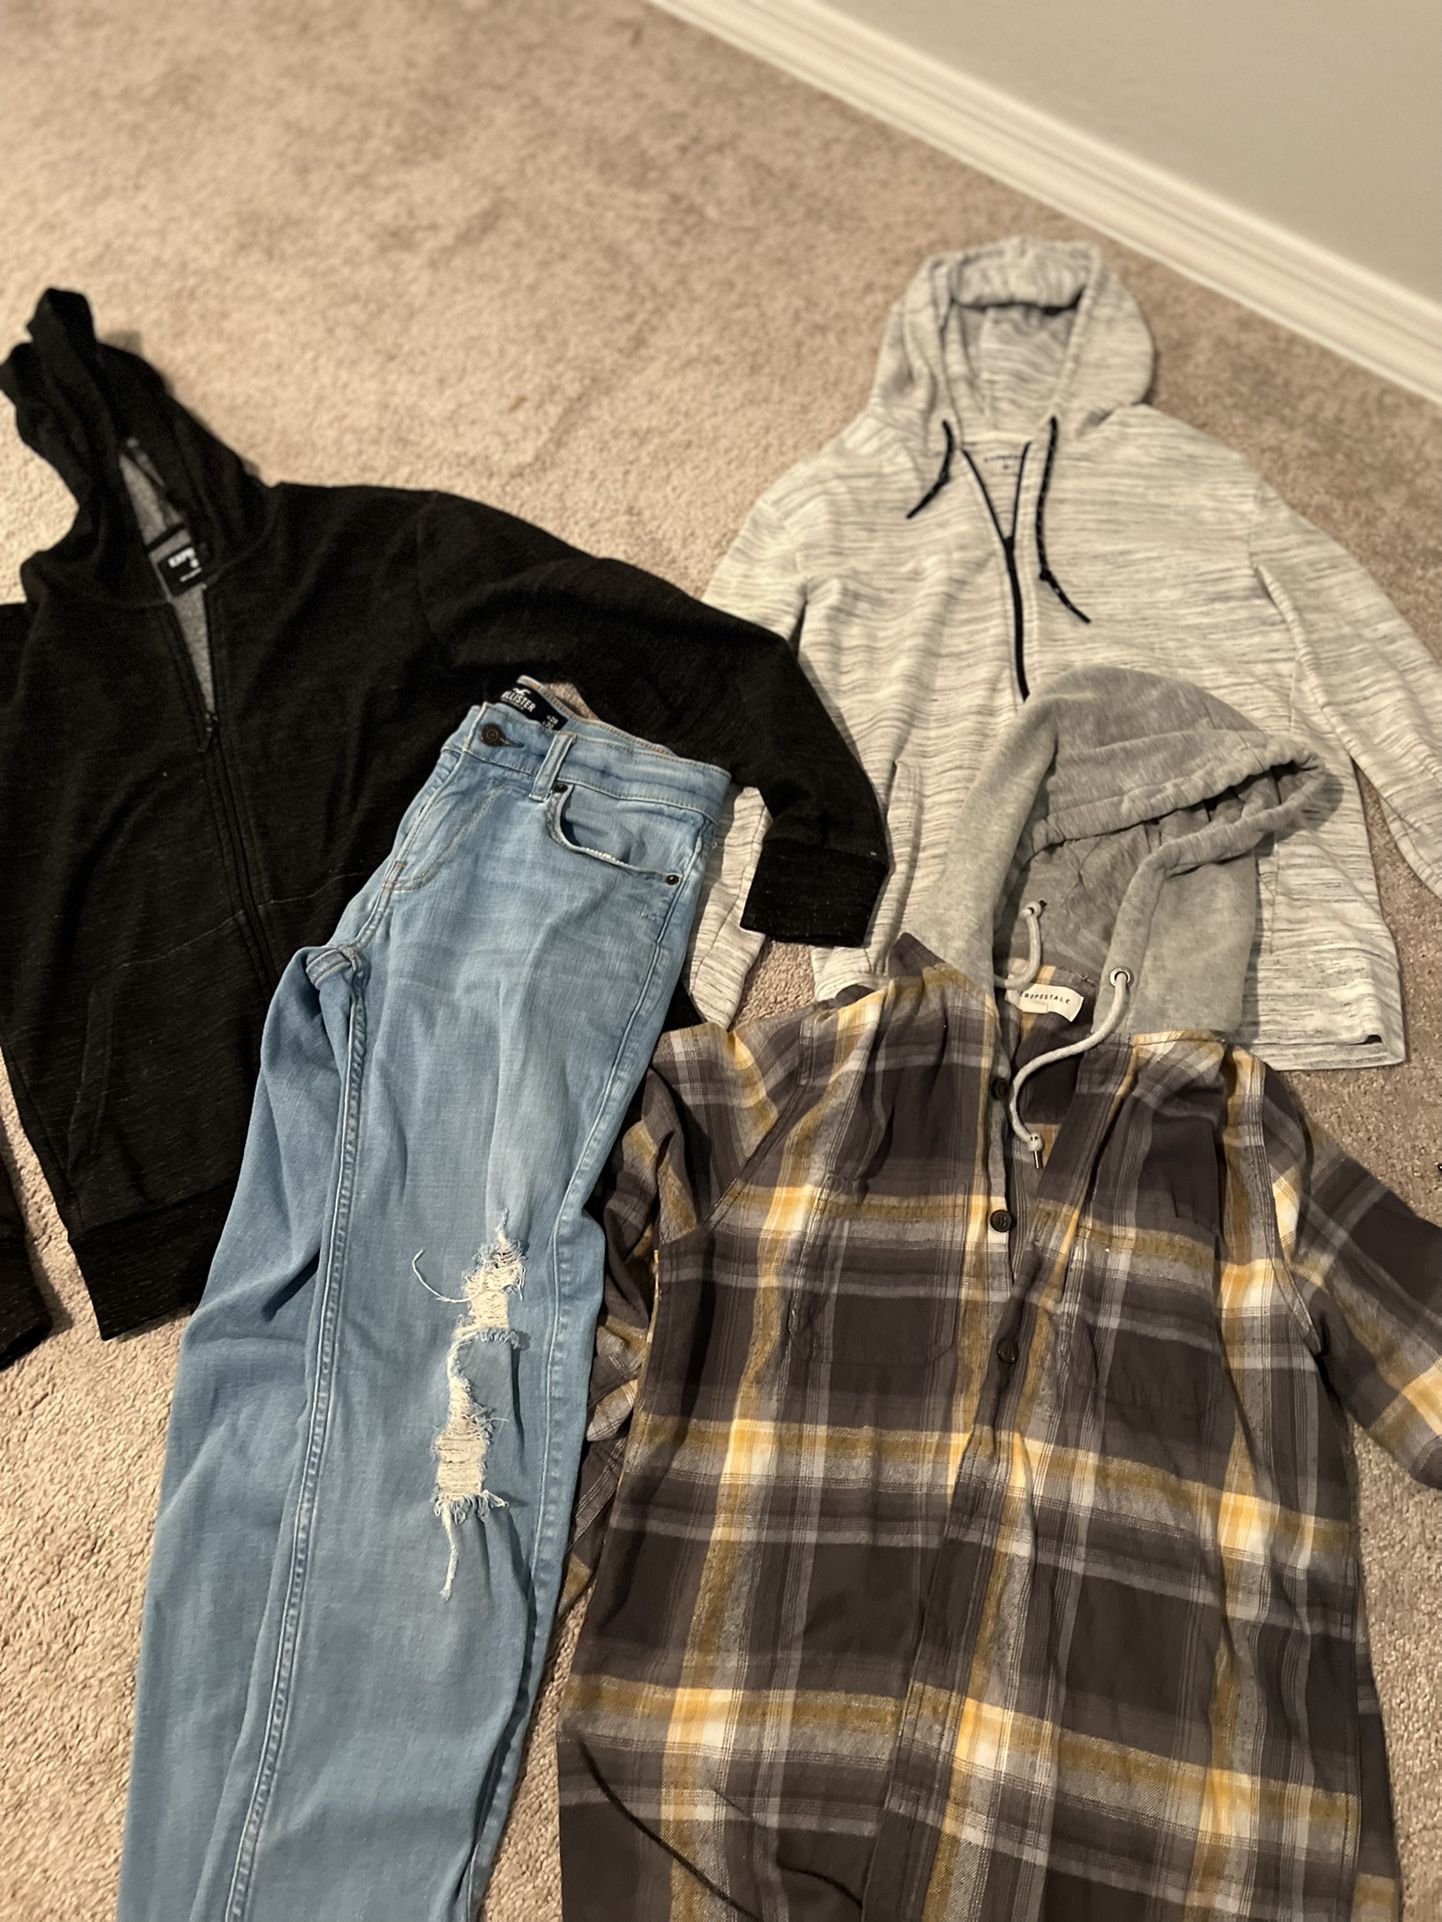 Young Men Size S -clothes- Express, Hollister, Etc 